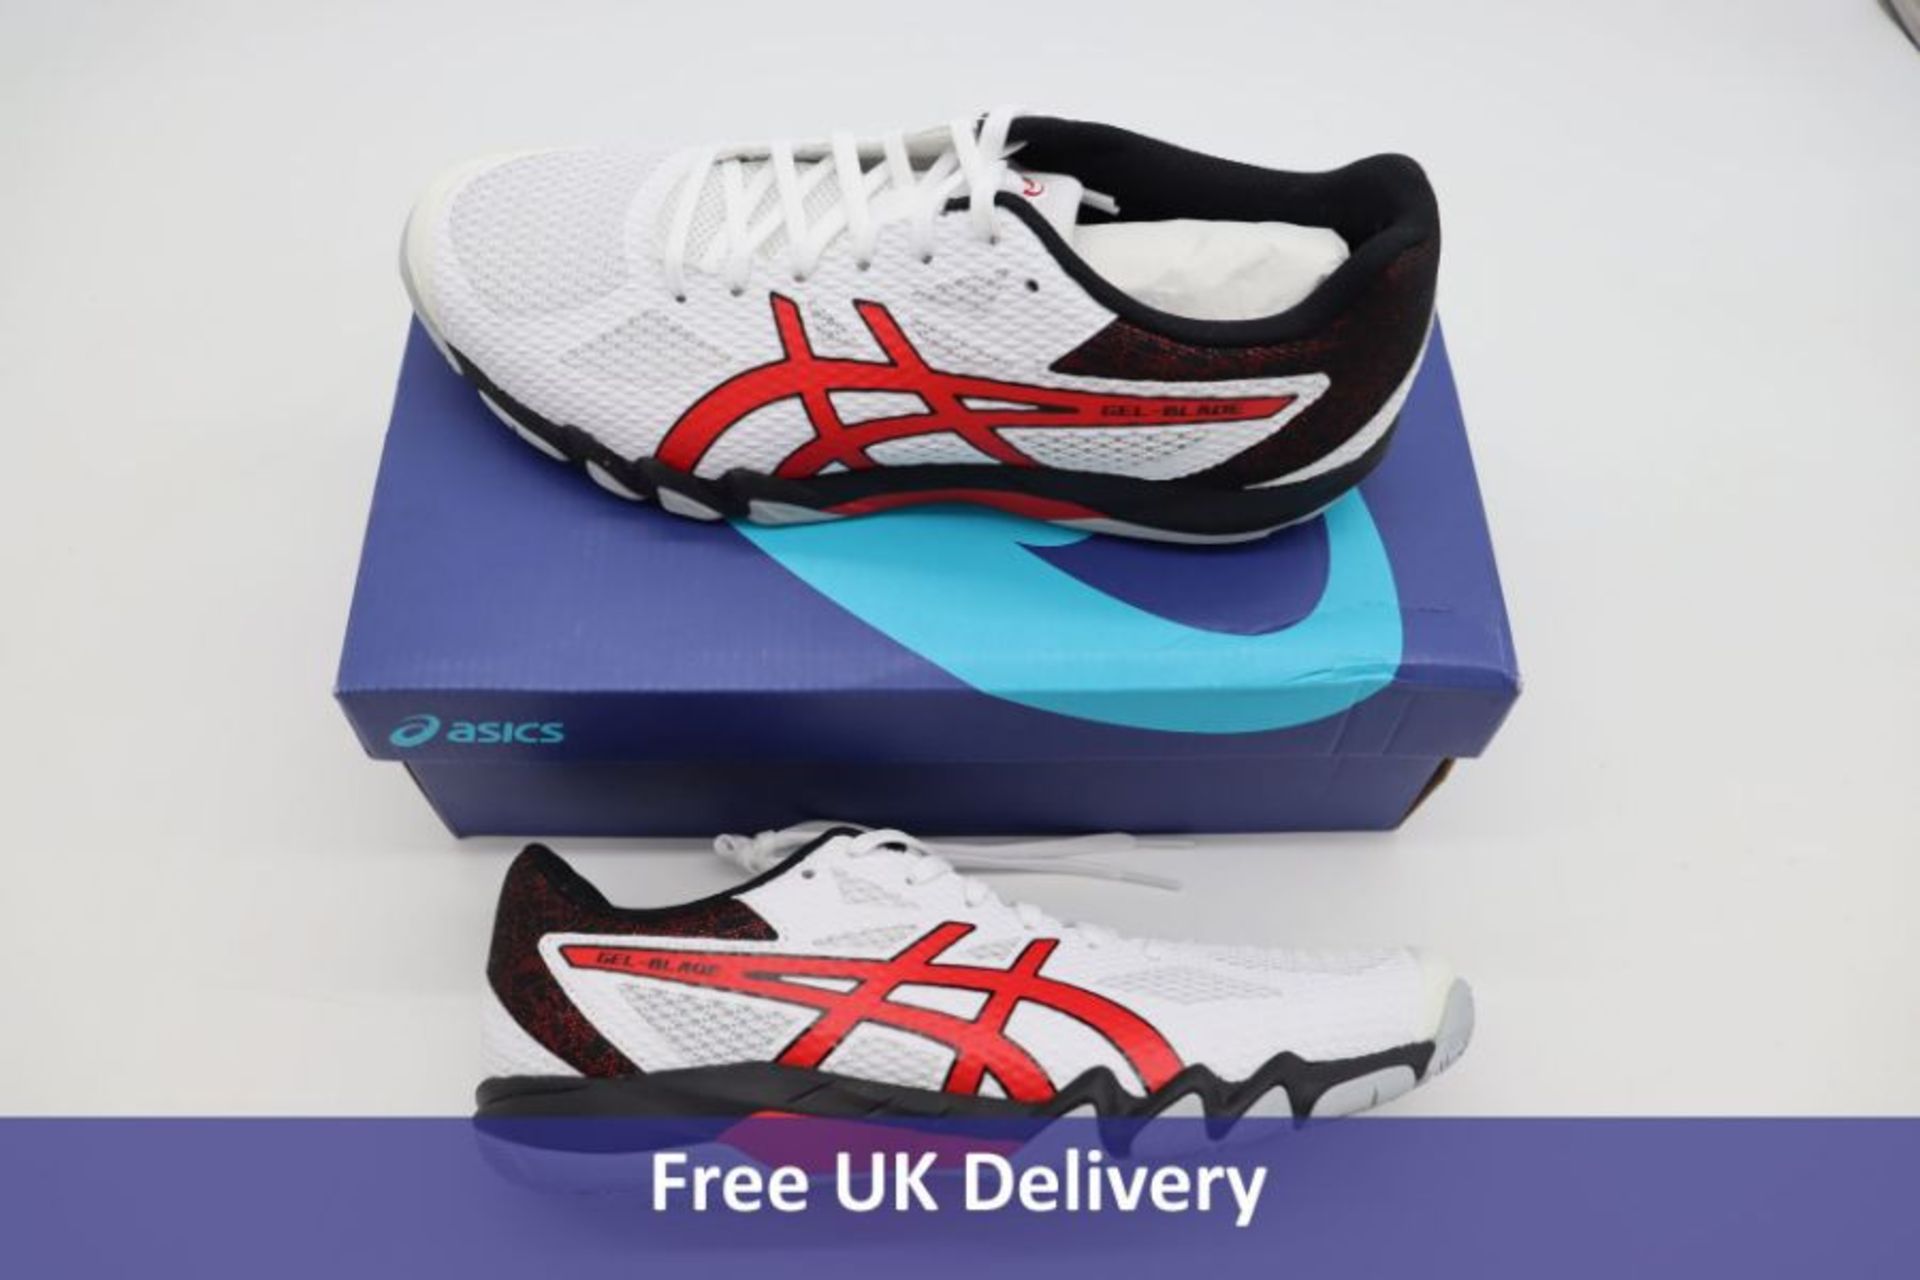 Asics Men's Gel-Blade 7 Trainers, White/Classic Red, UK 8.5